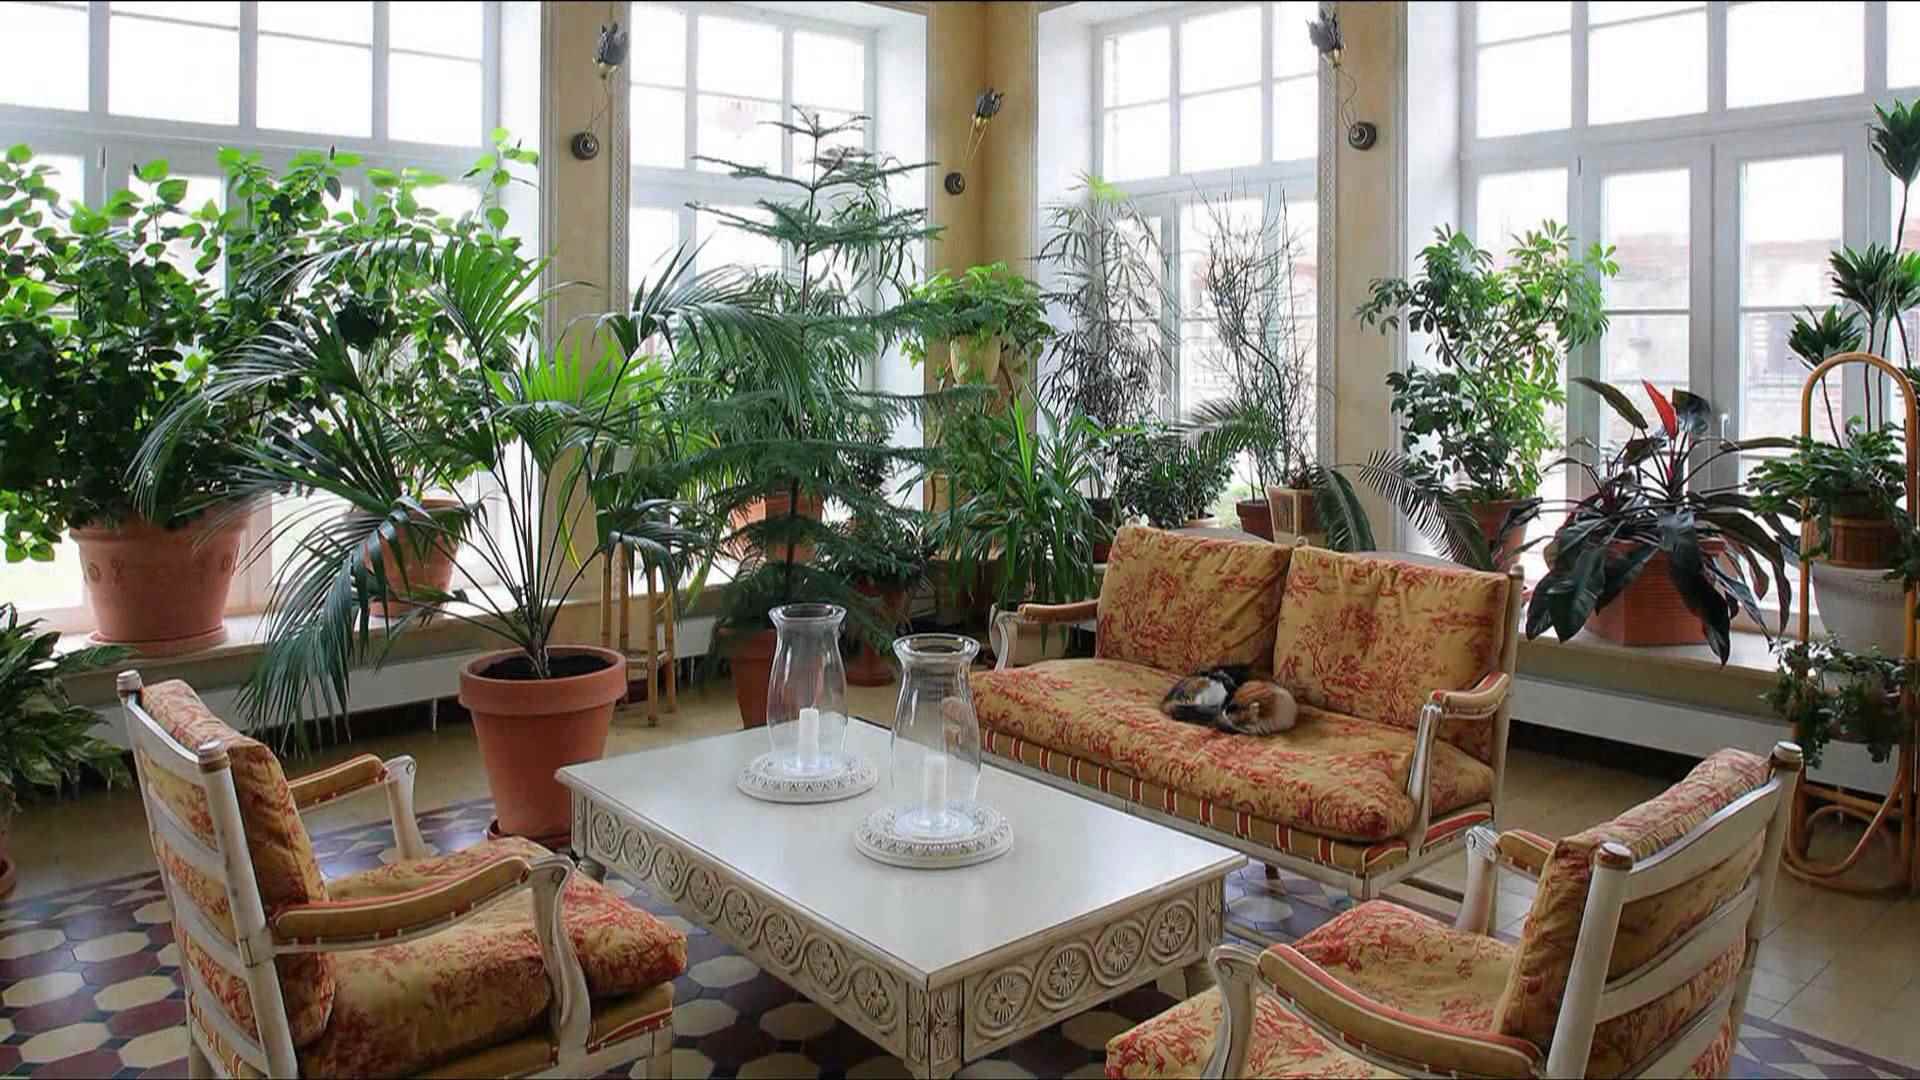 the idea of ​​using unusual ideas for decorating a winter garden